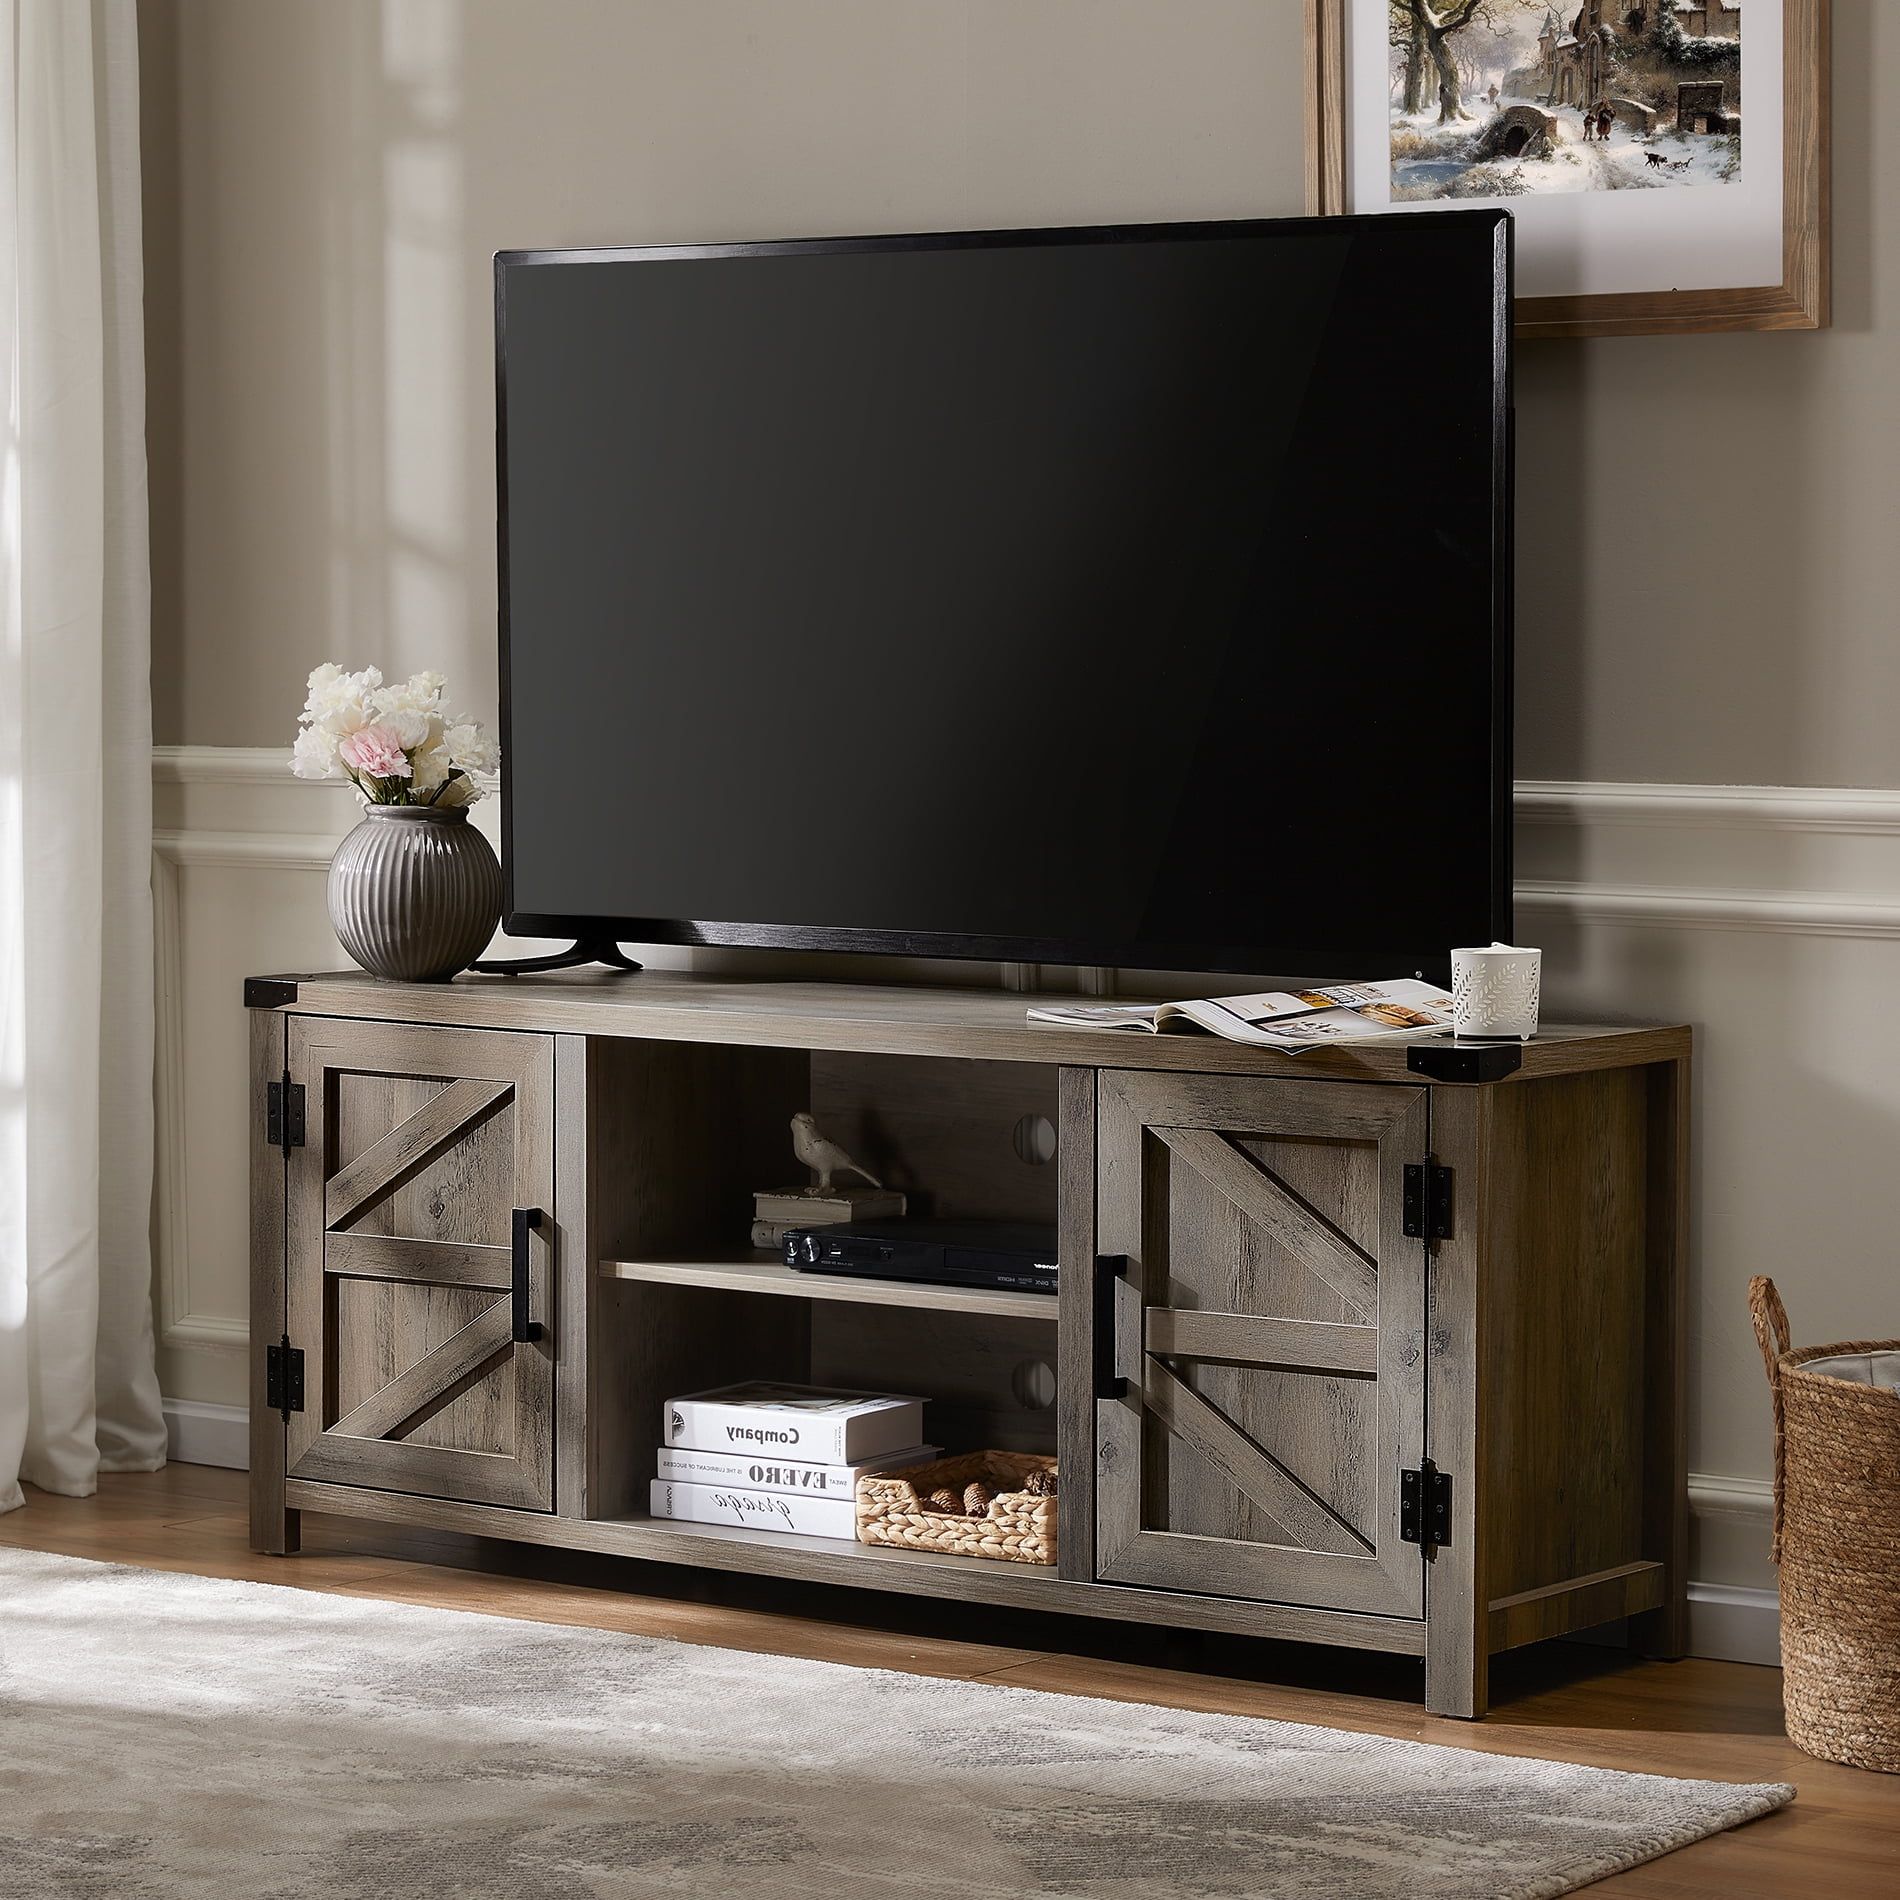 Living Room Furniture Home & Kitchen Fitueyes Wampat Wood Tv Stand For With Regard To 110" Tvs Wood Tv Cabinet With Drawers (Gallery 8 of 20)